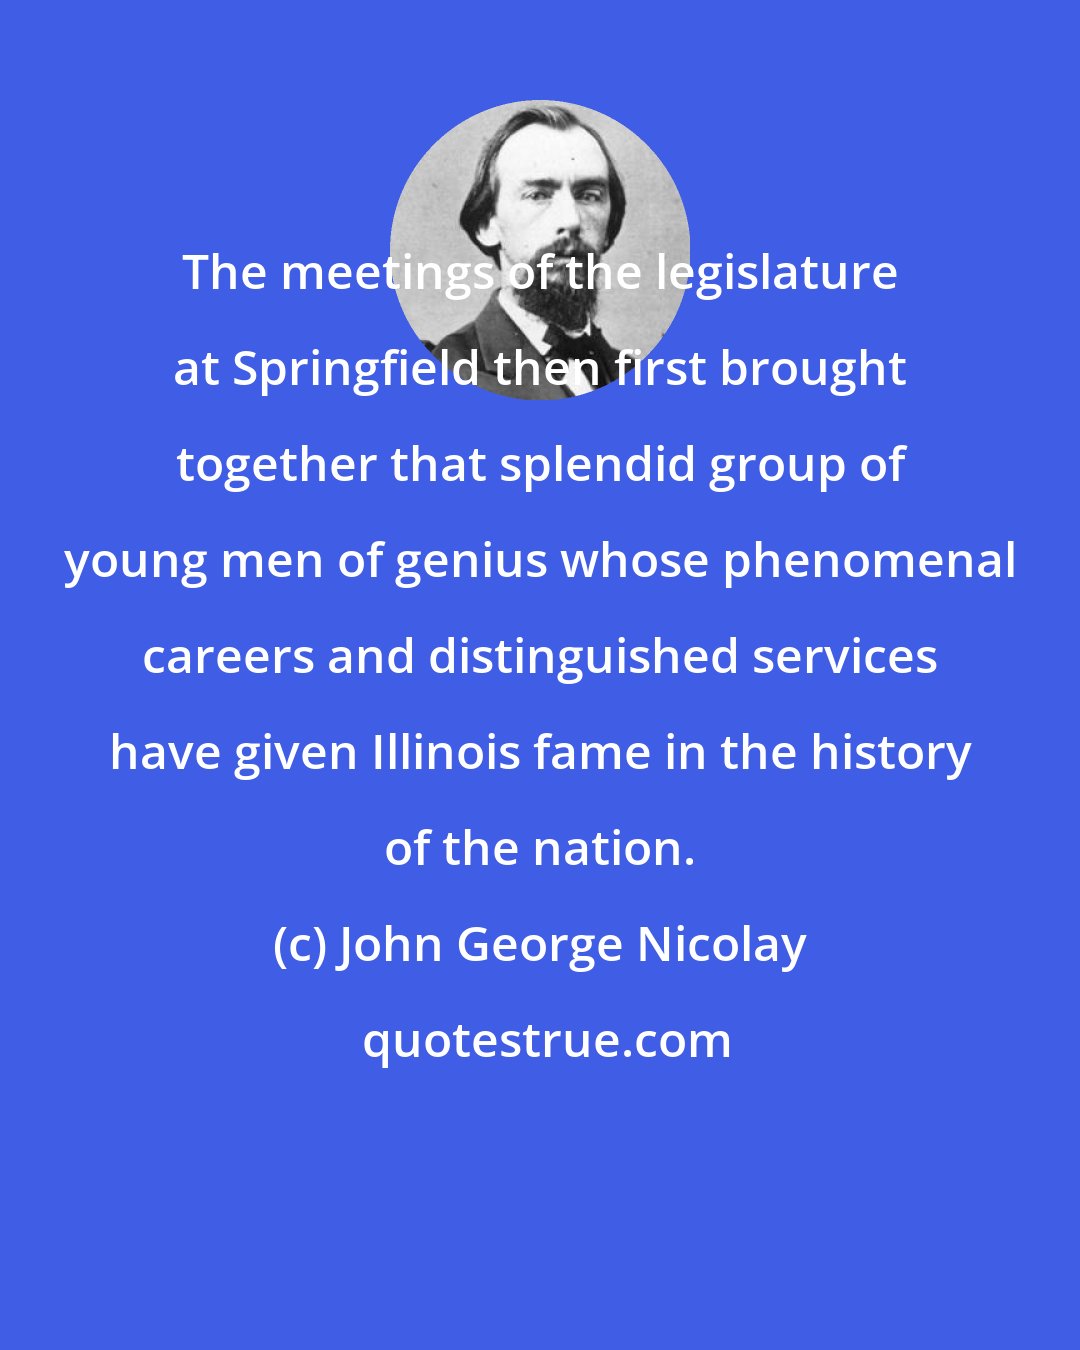 John George Nicolay: The meetings of the legislature at Springfield then first brought together that splendid group of young men of genius whose phenomenal careers and distinguished services have given Illinois fame in the history of the nation.